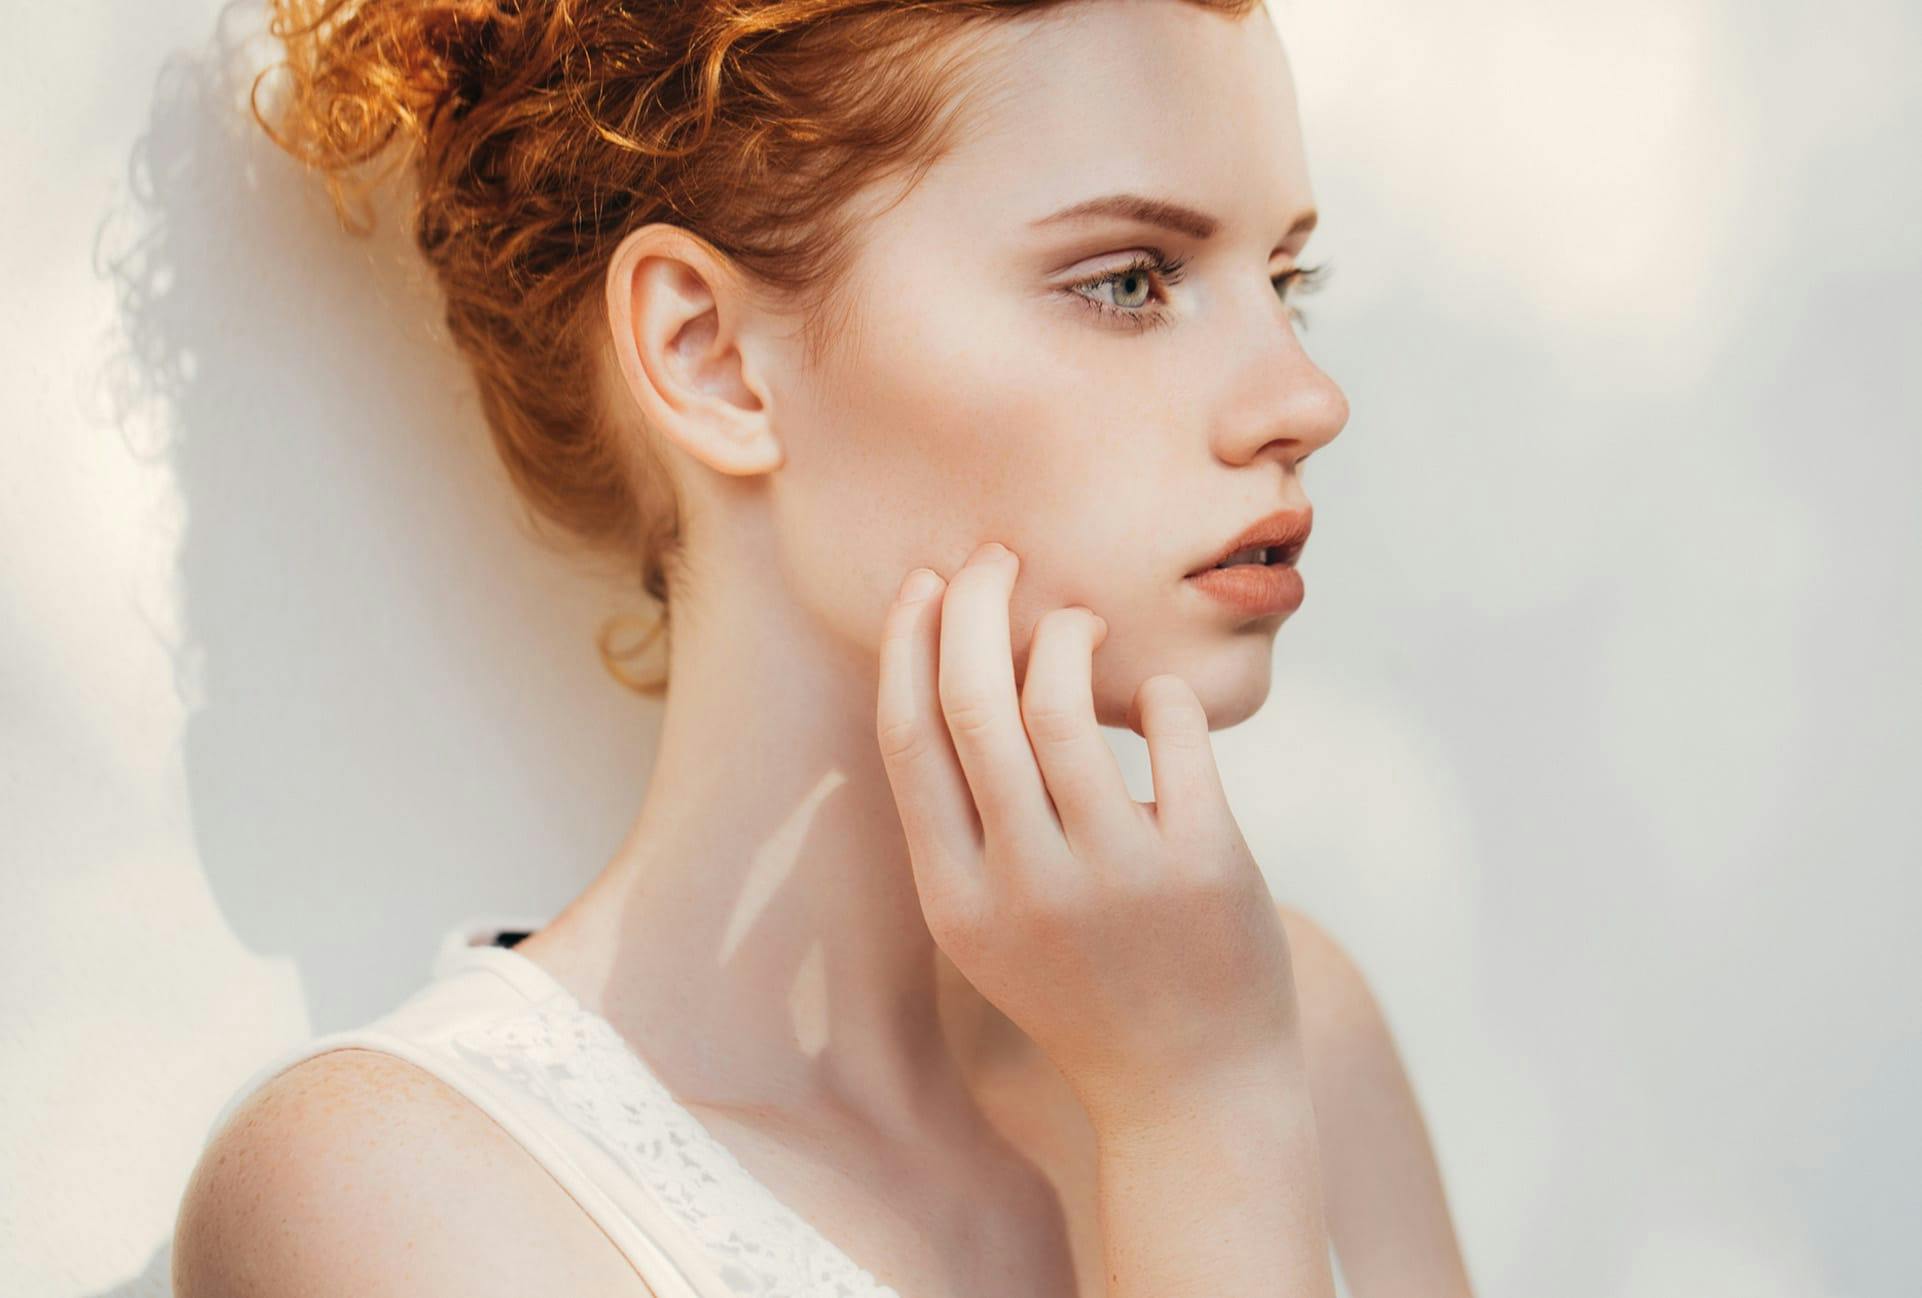 Woman with pale skin and red hair in an updo